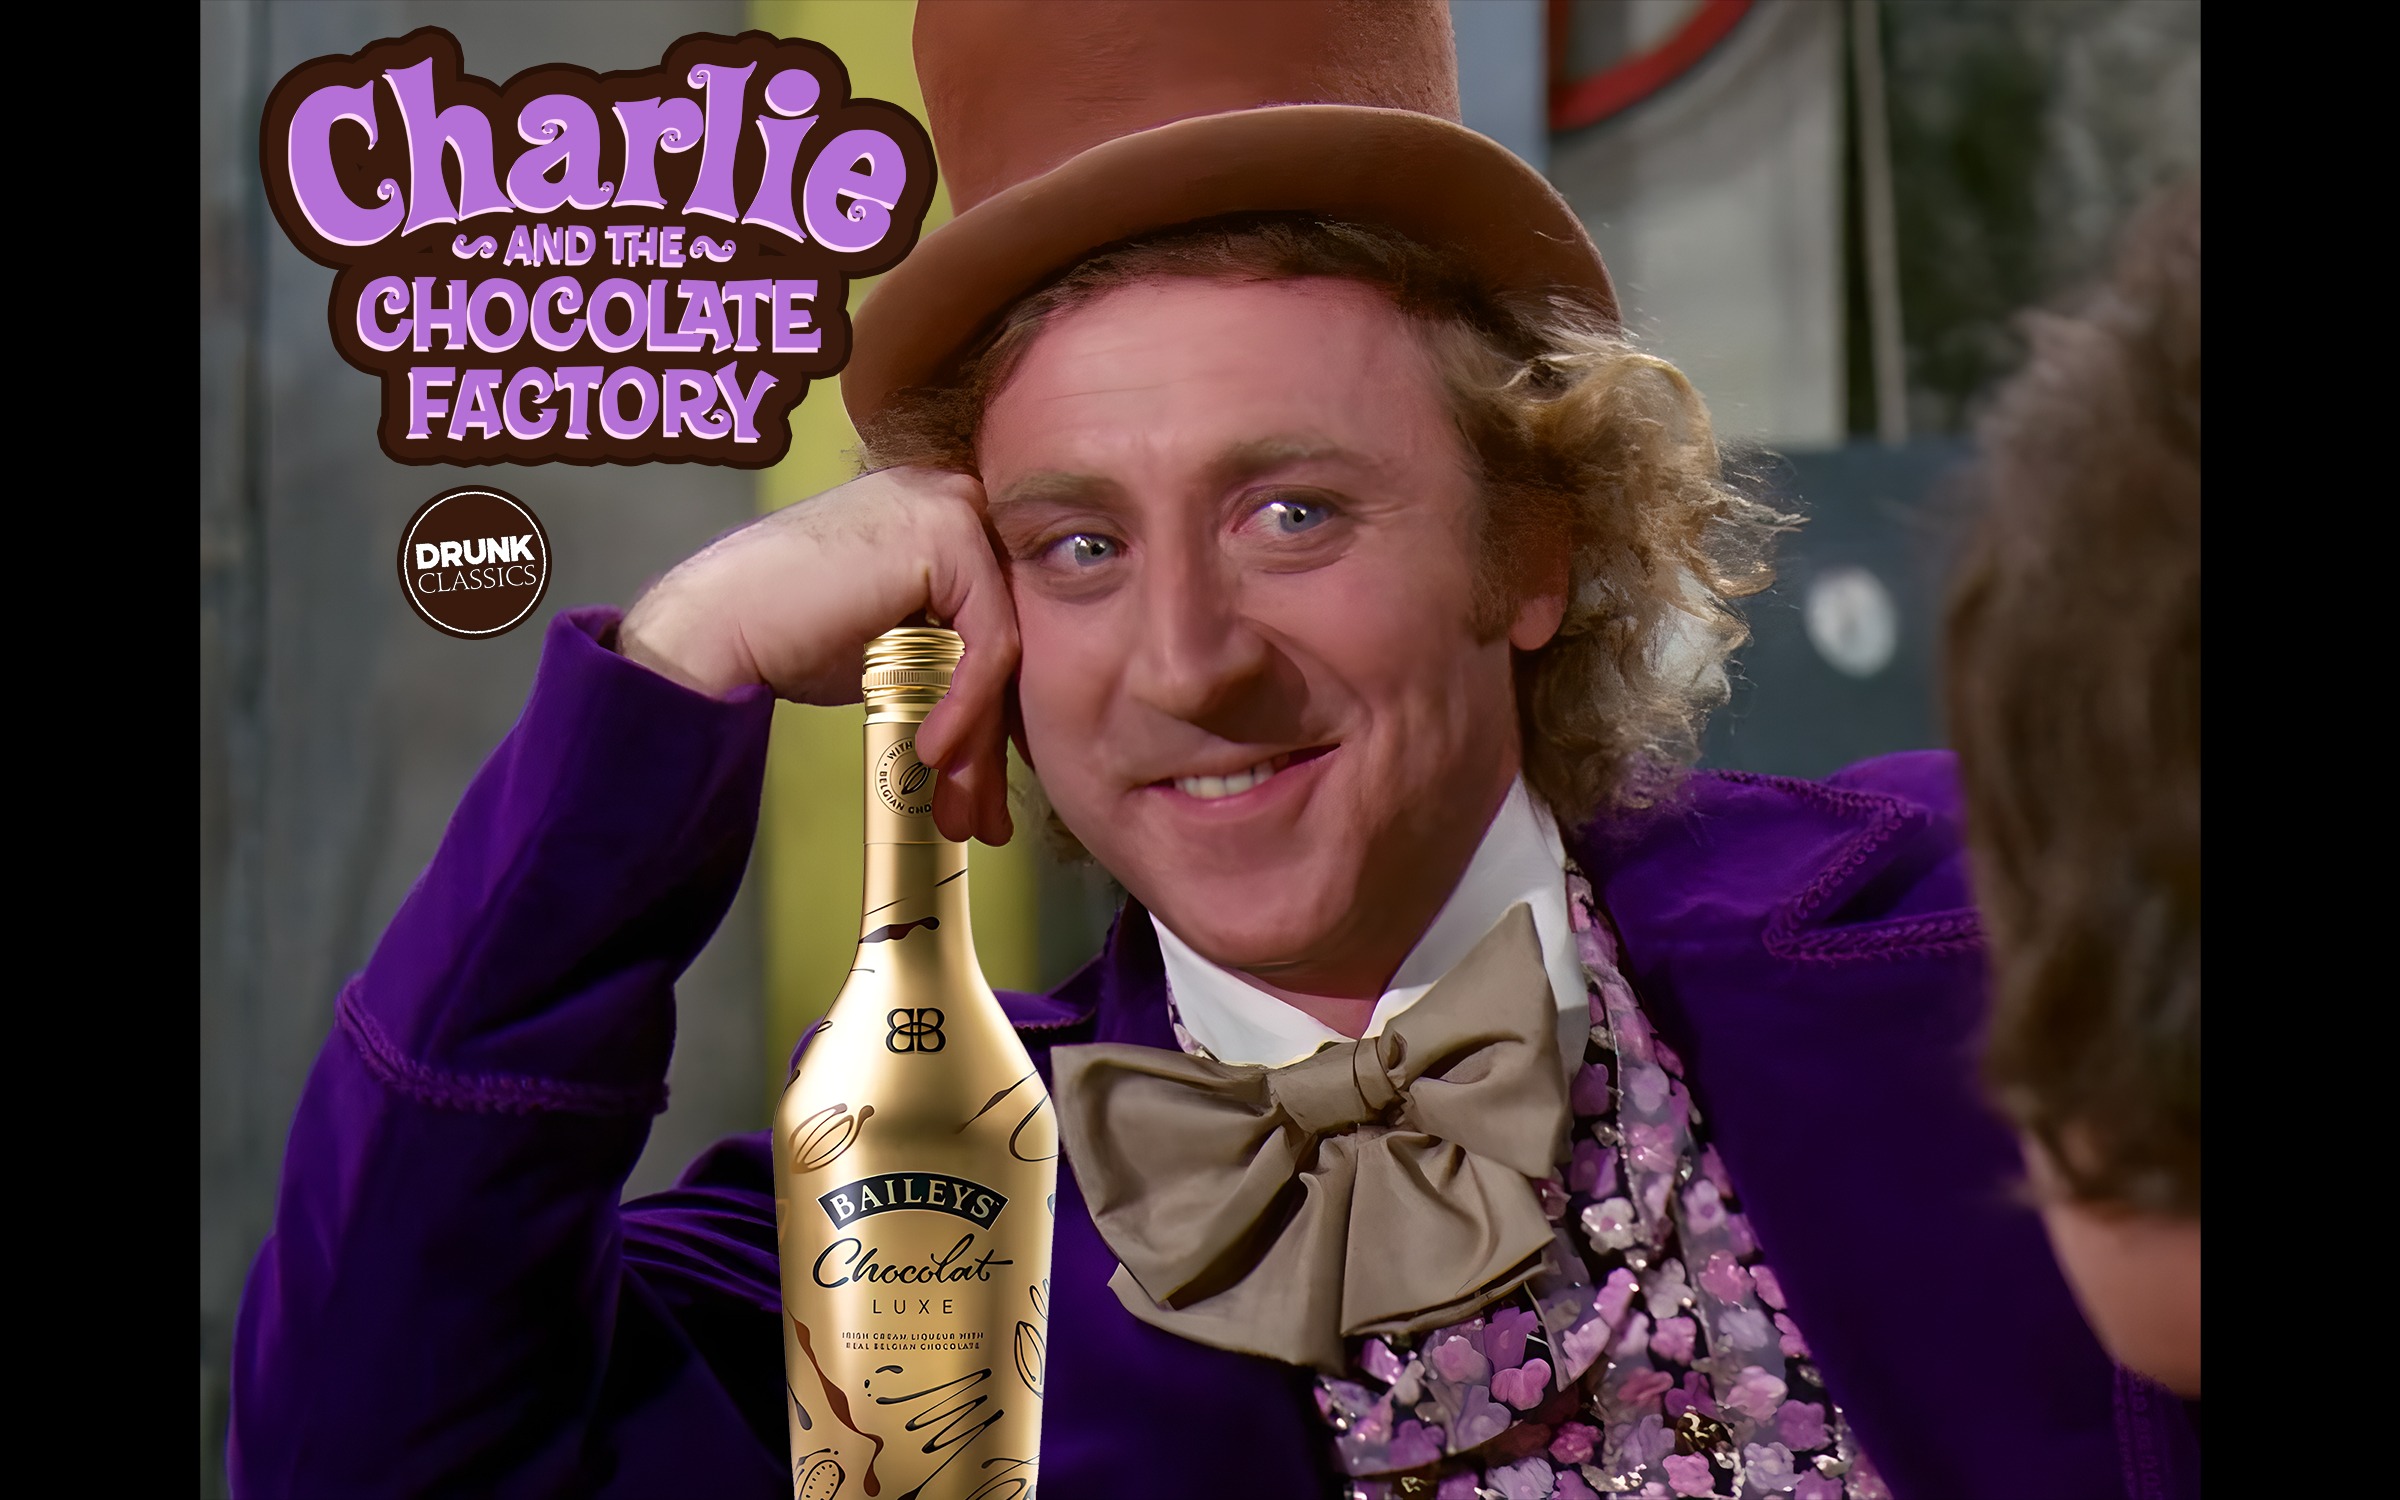 Drunk Classics: Charlie and the Chocolate Factory